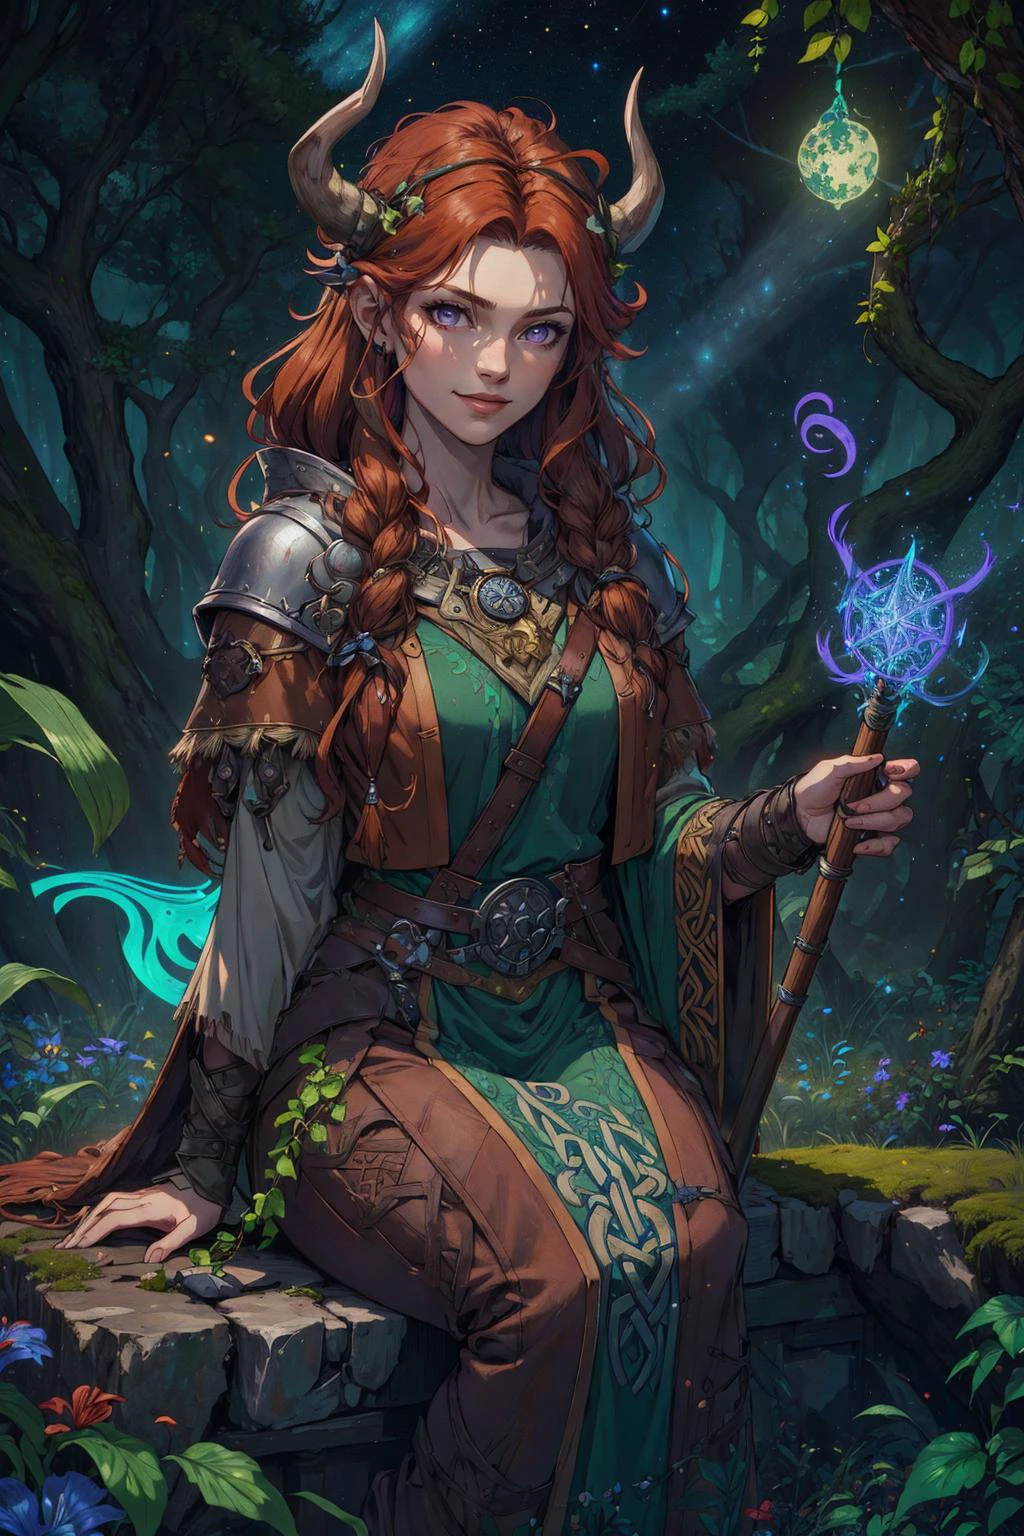 beautiful, linework, (outlines:1.05), shadows, (8K:1.2),
1 girl, adult czech woman,  purple eyes, brown quiff hair,  
(Style-SwampMagic:0.4), focus on character portrait, solo,  half shot, looking down, detailed background, detailed face, (vikingpunkai, norse viking theme:1.1), warm smile,  druid, wearing natural colored brown robes,  leather, druid staff,  sitting, restoration spell, inscriptions,   natural magic, floating particles, swirling leaves in the air, moss, vines,  branches, rock,  lilies, sprouting plants,  starry sky,  forest in background, ethereal peaceful atmosphere,